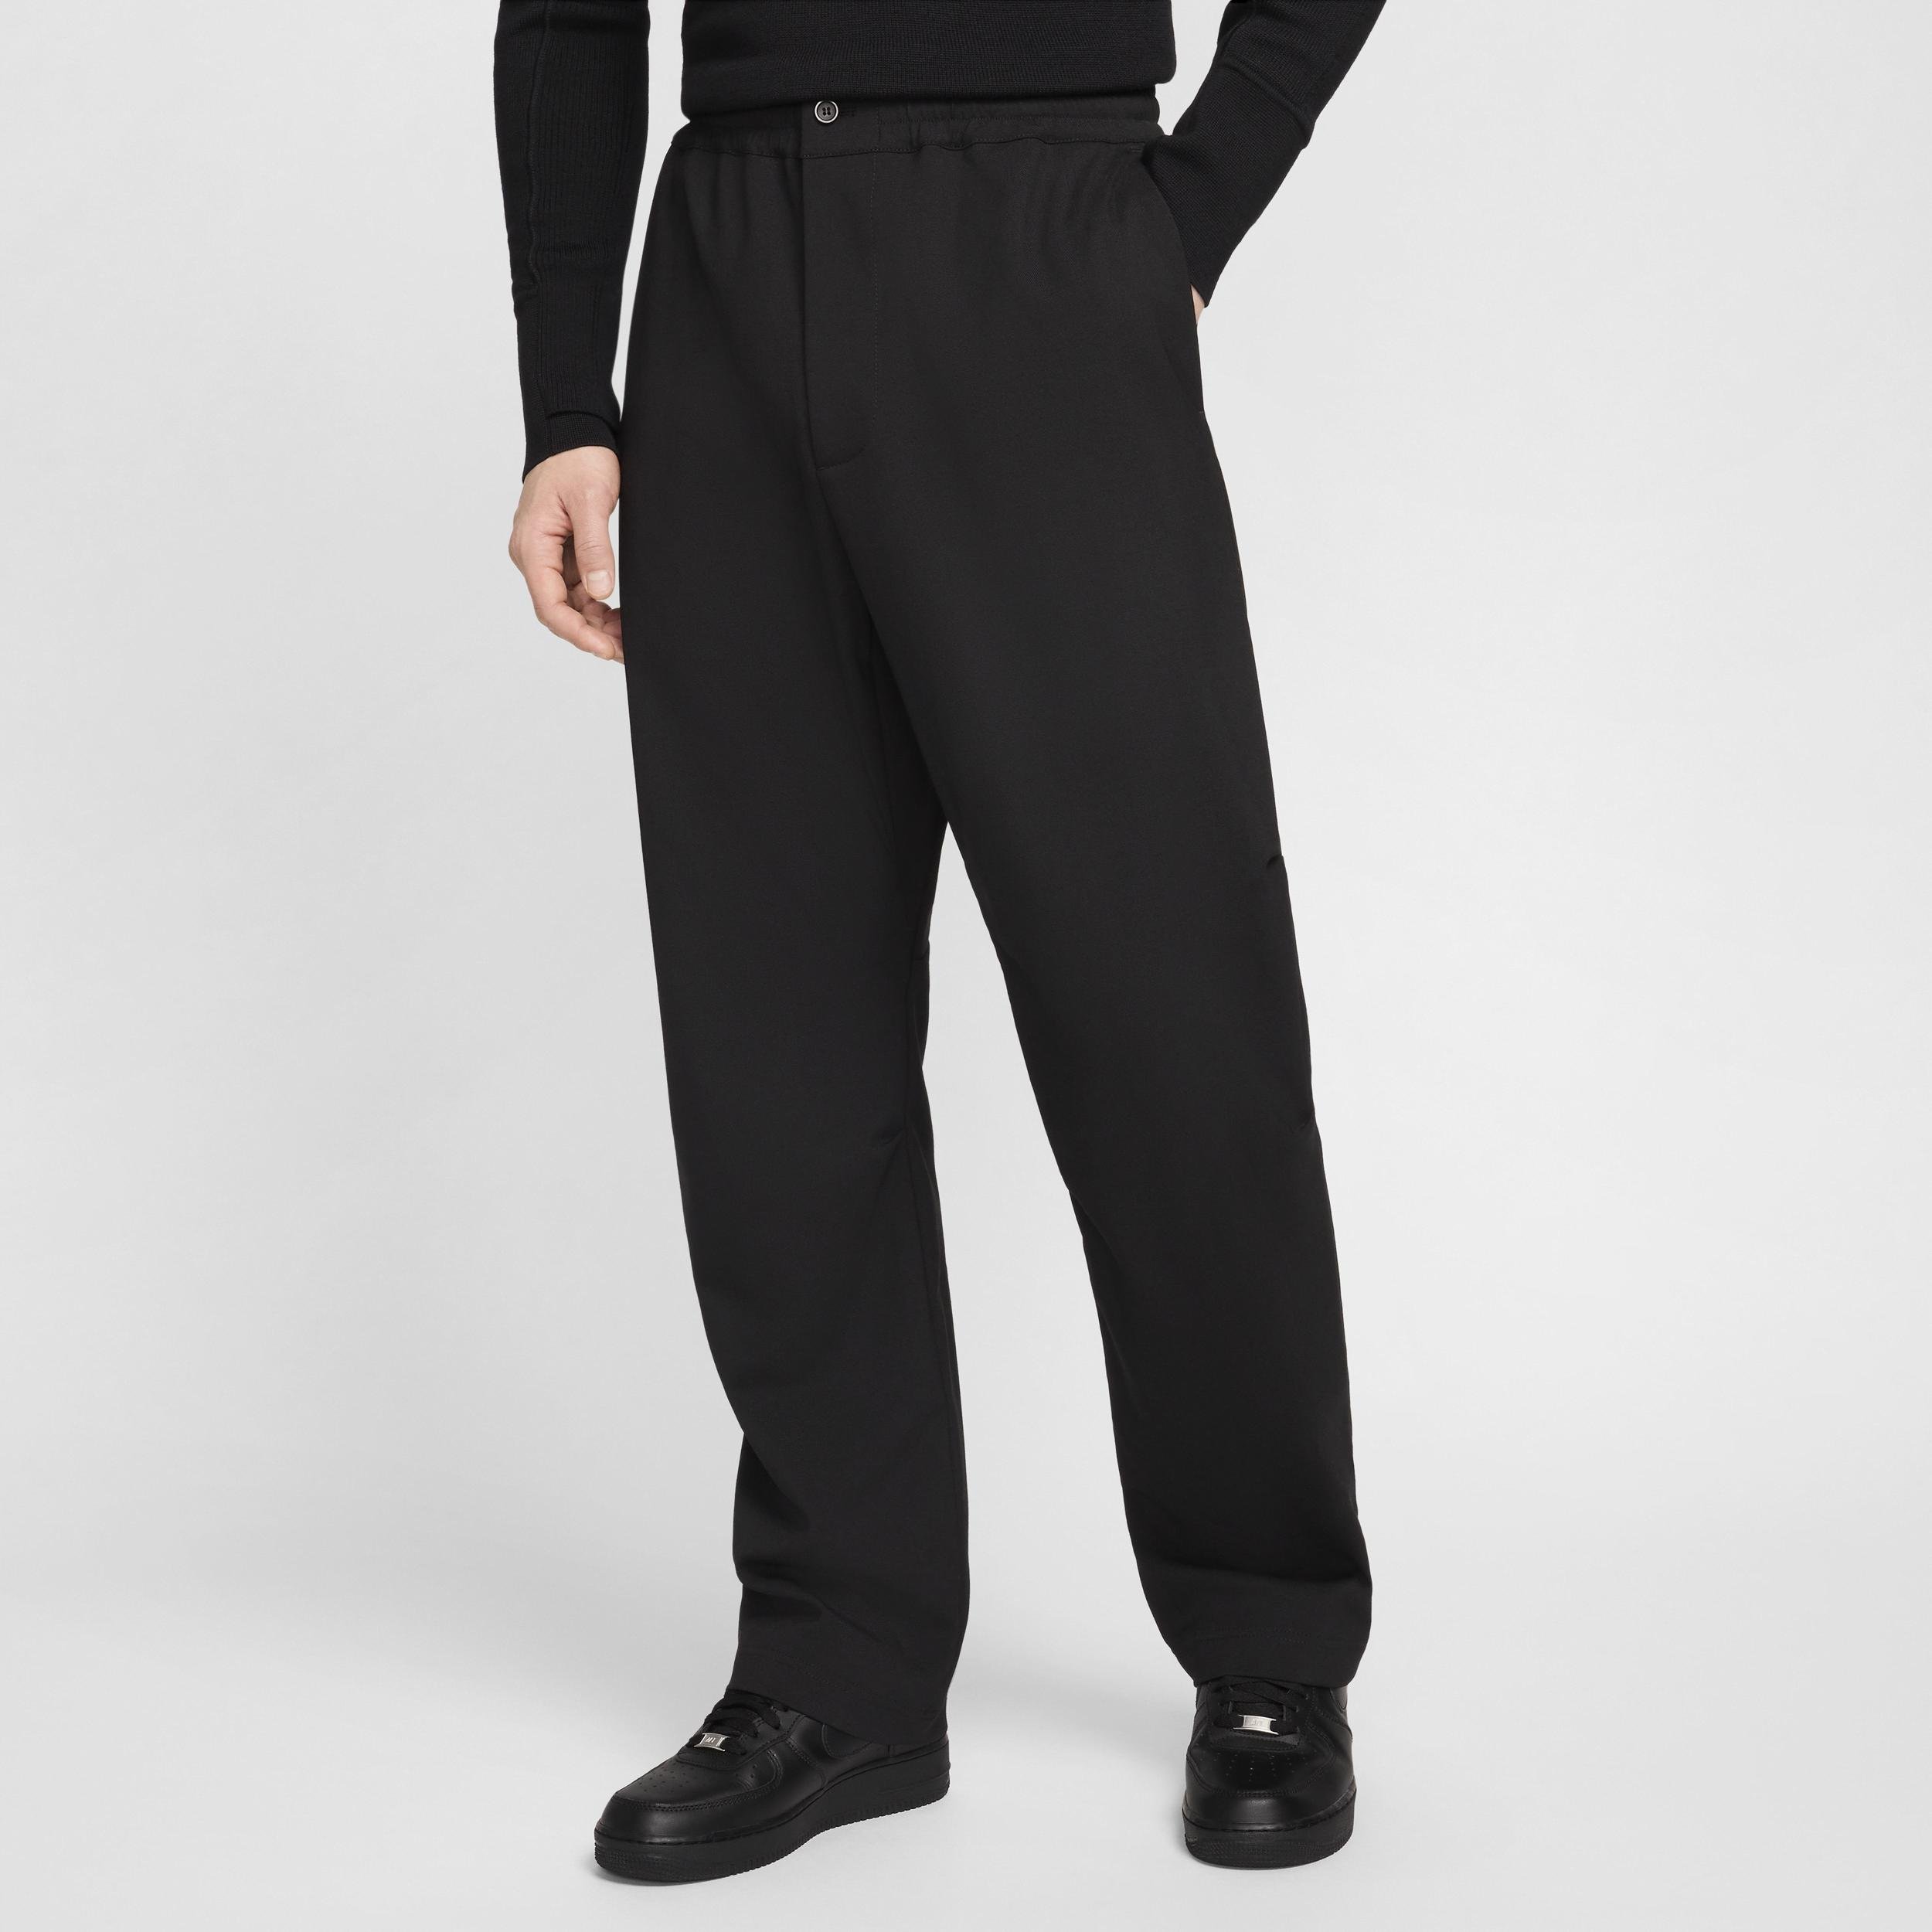 Nike Men's Every Stitch Considered Computational Pants 2.0 by NIKE